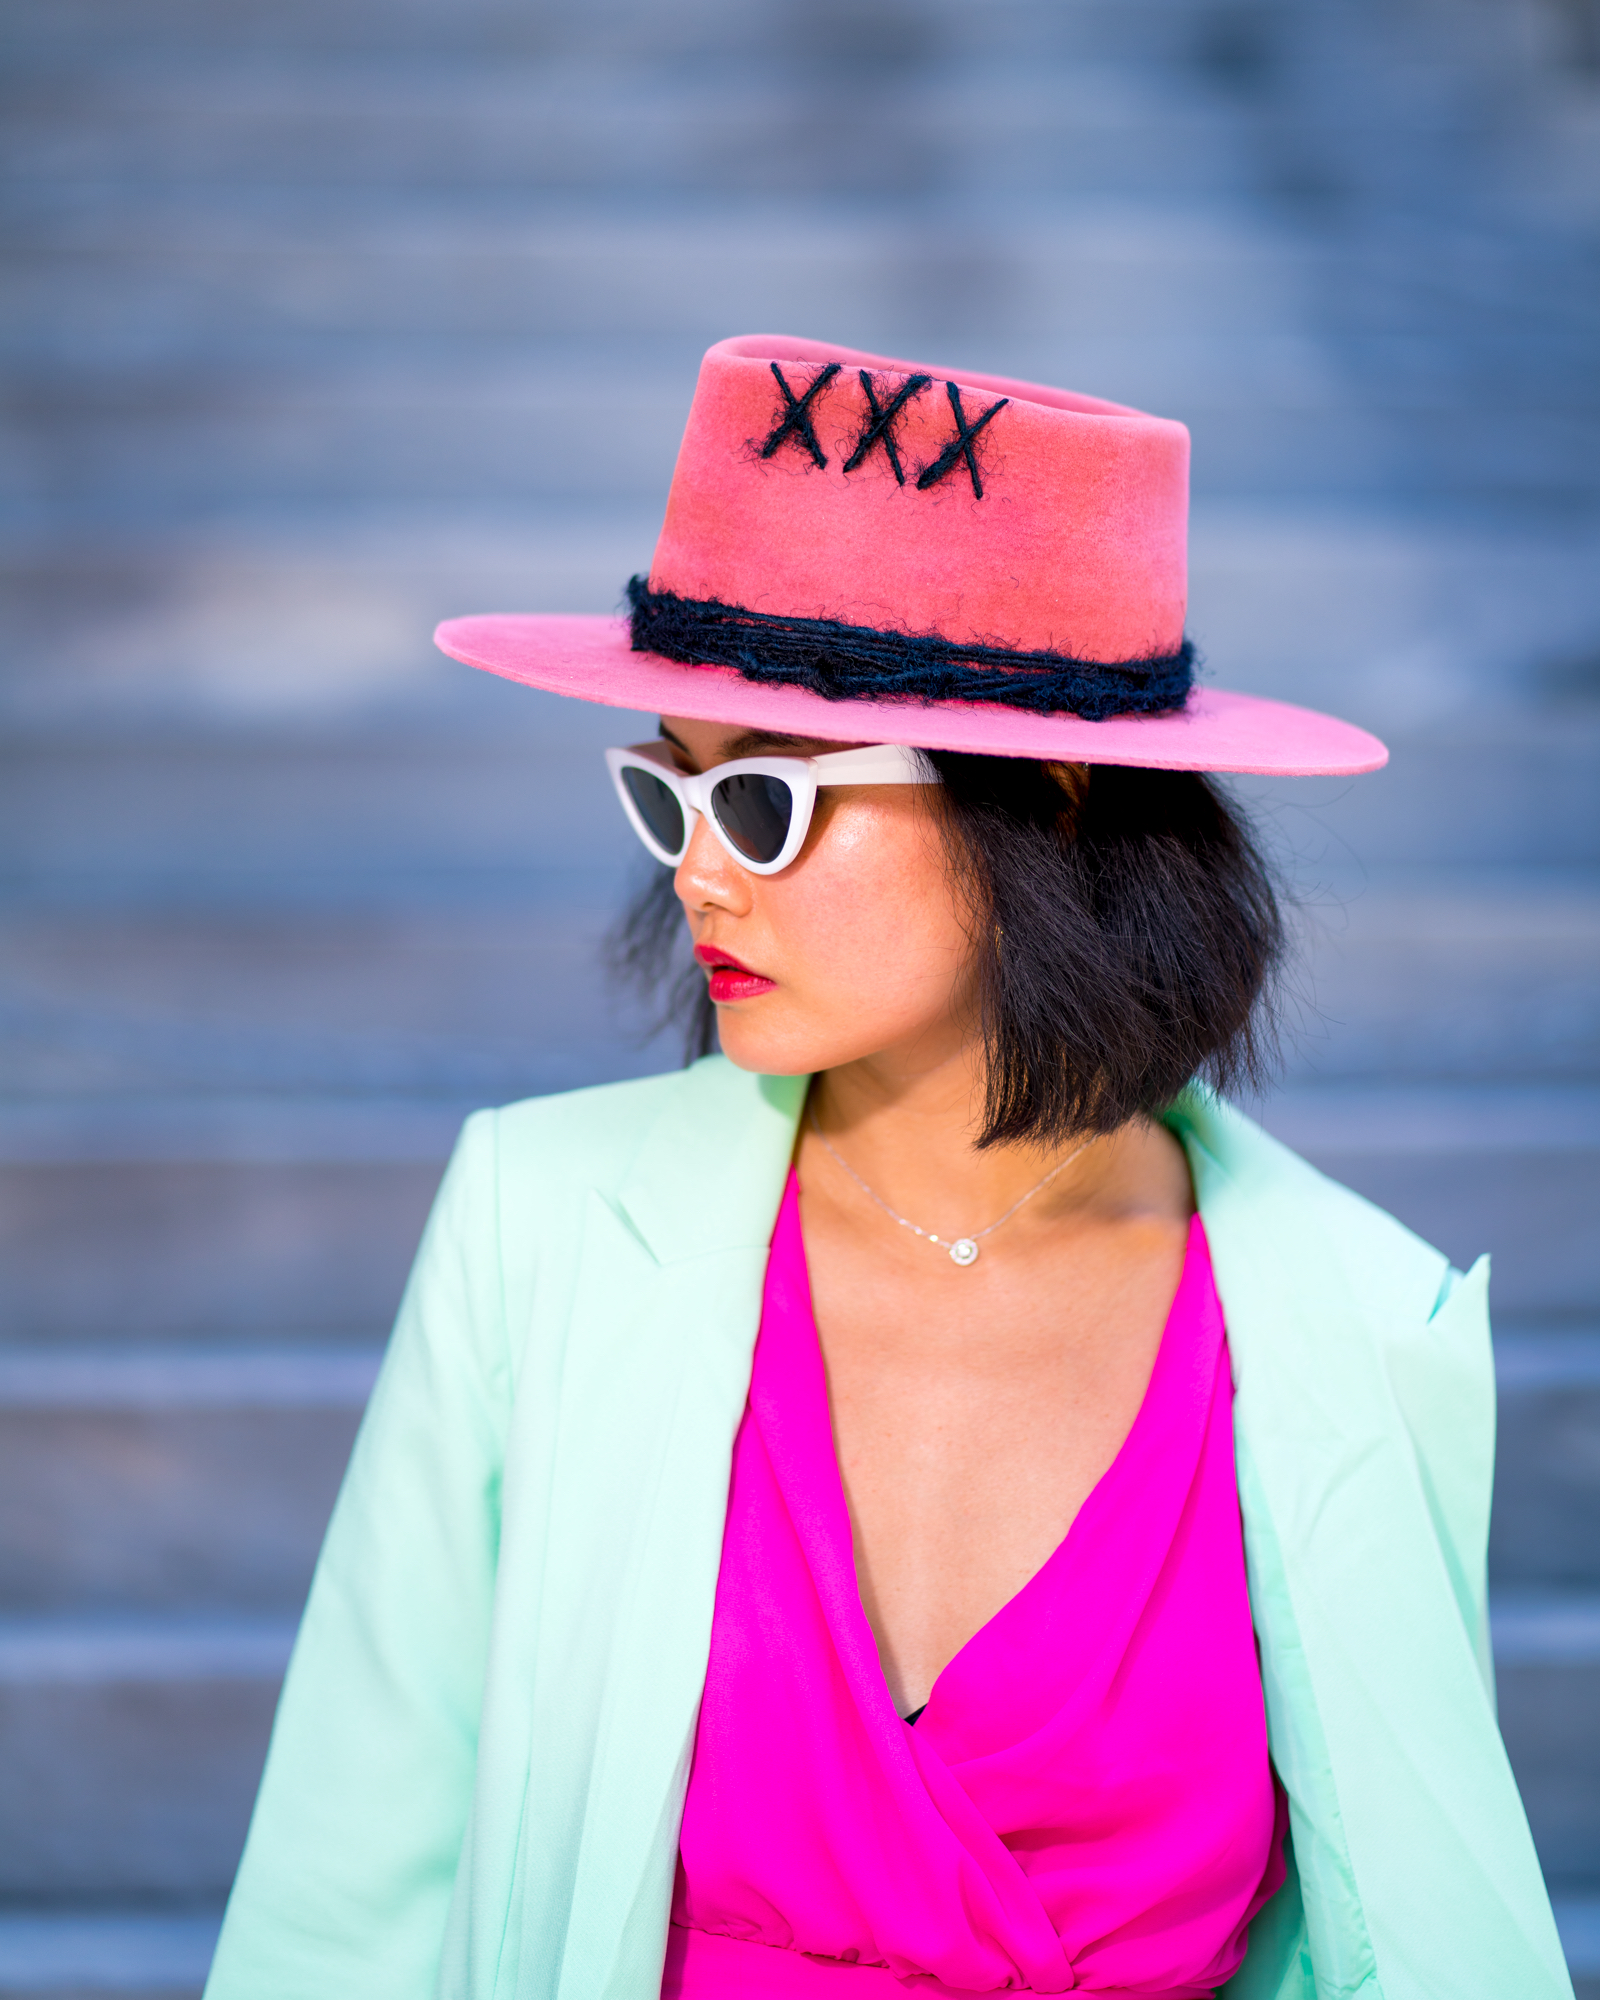 Black in Business: Featured The Pretty Girls Like Hat Design of